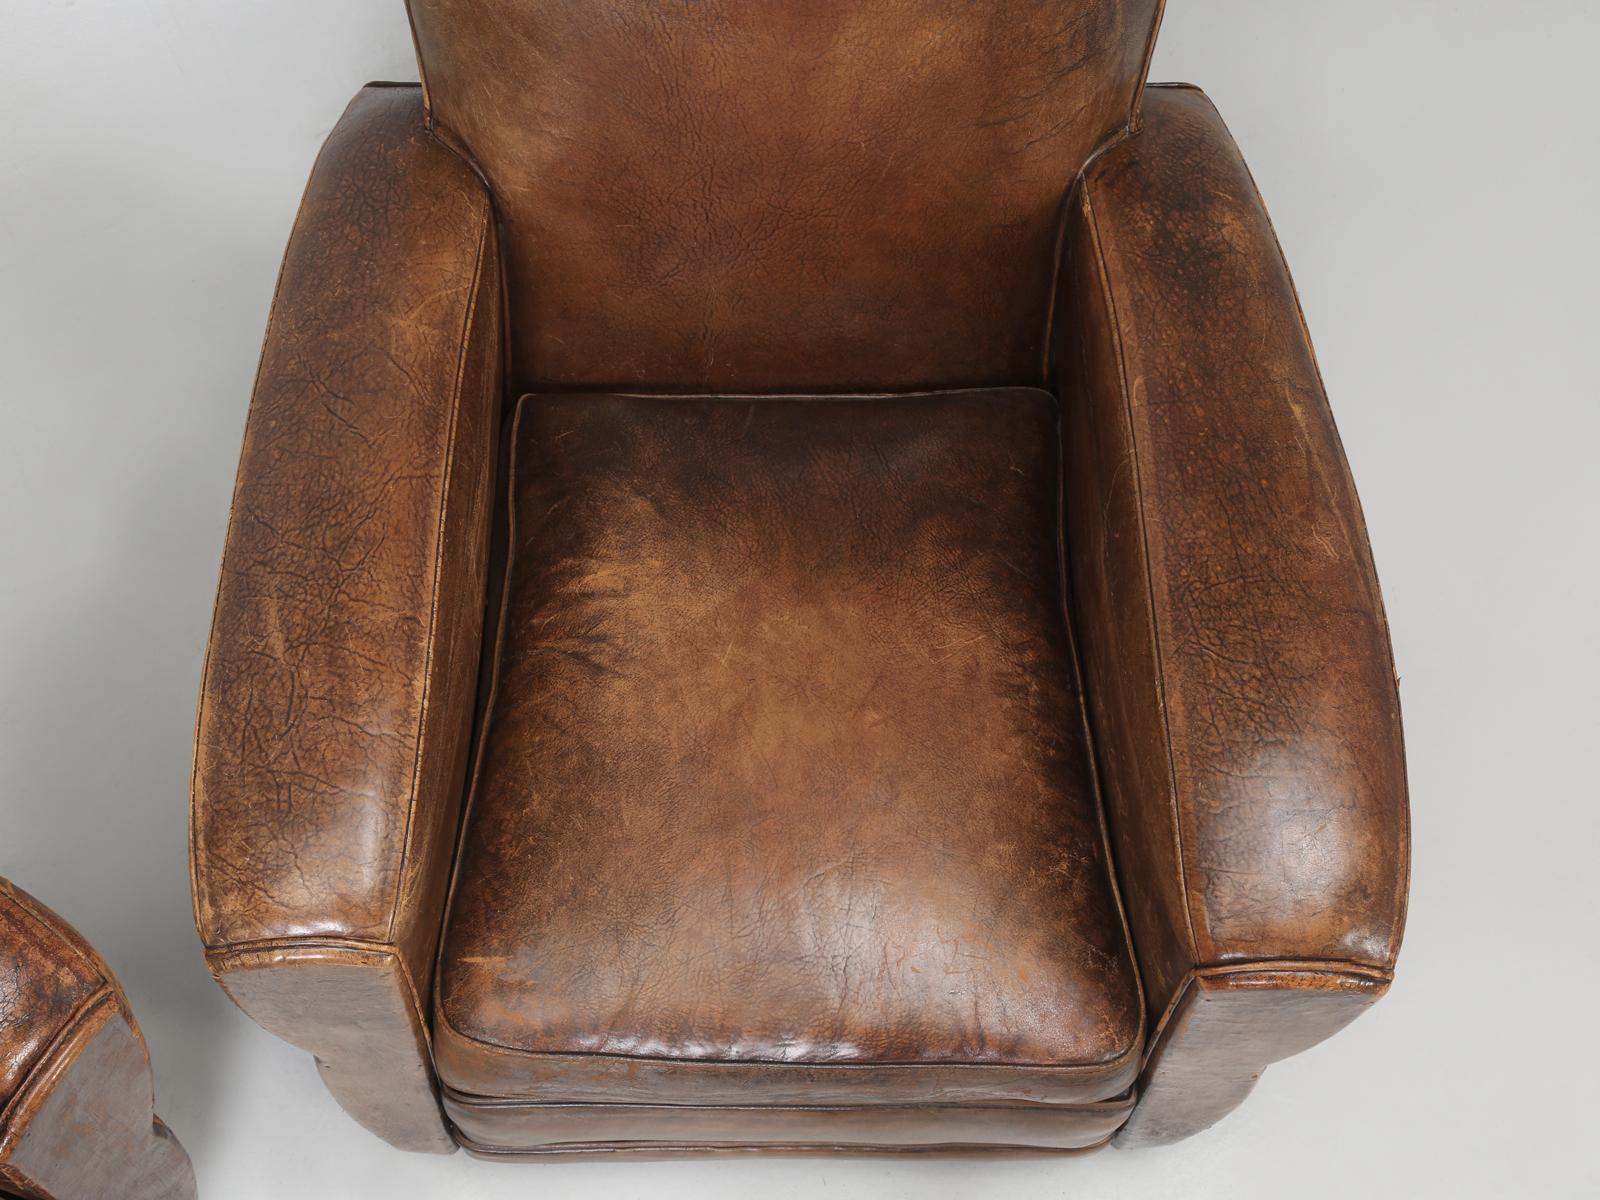 French Leather Club Chairs Restored Internally Cosmetically Original Third Avail 1